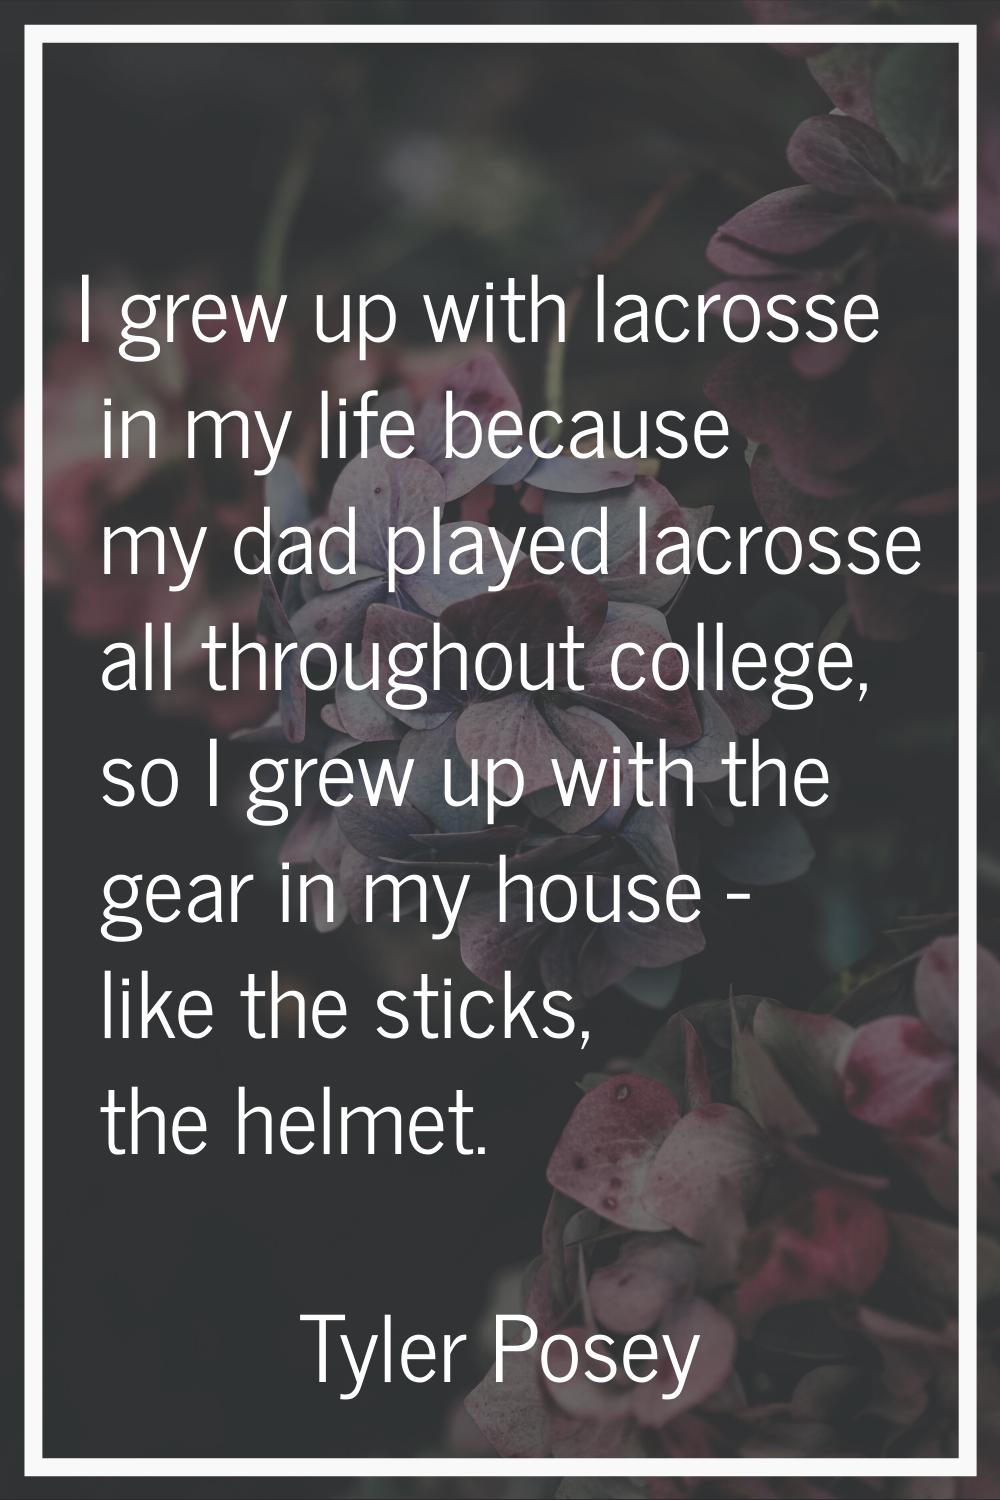 I grew up with lacrosse in my life because my dad played lacrosse all throughout college, so I grew